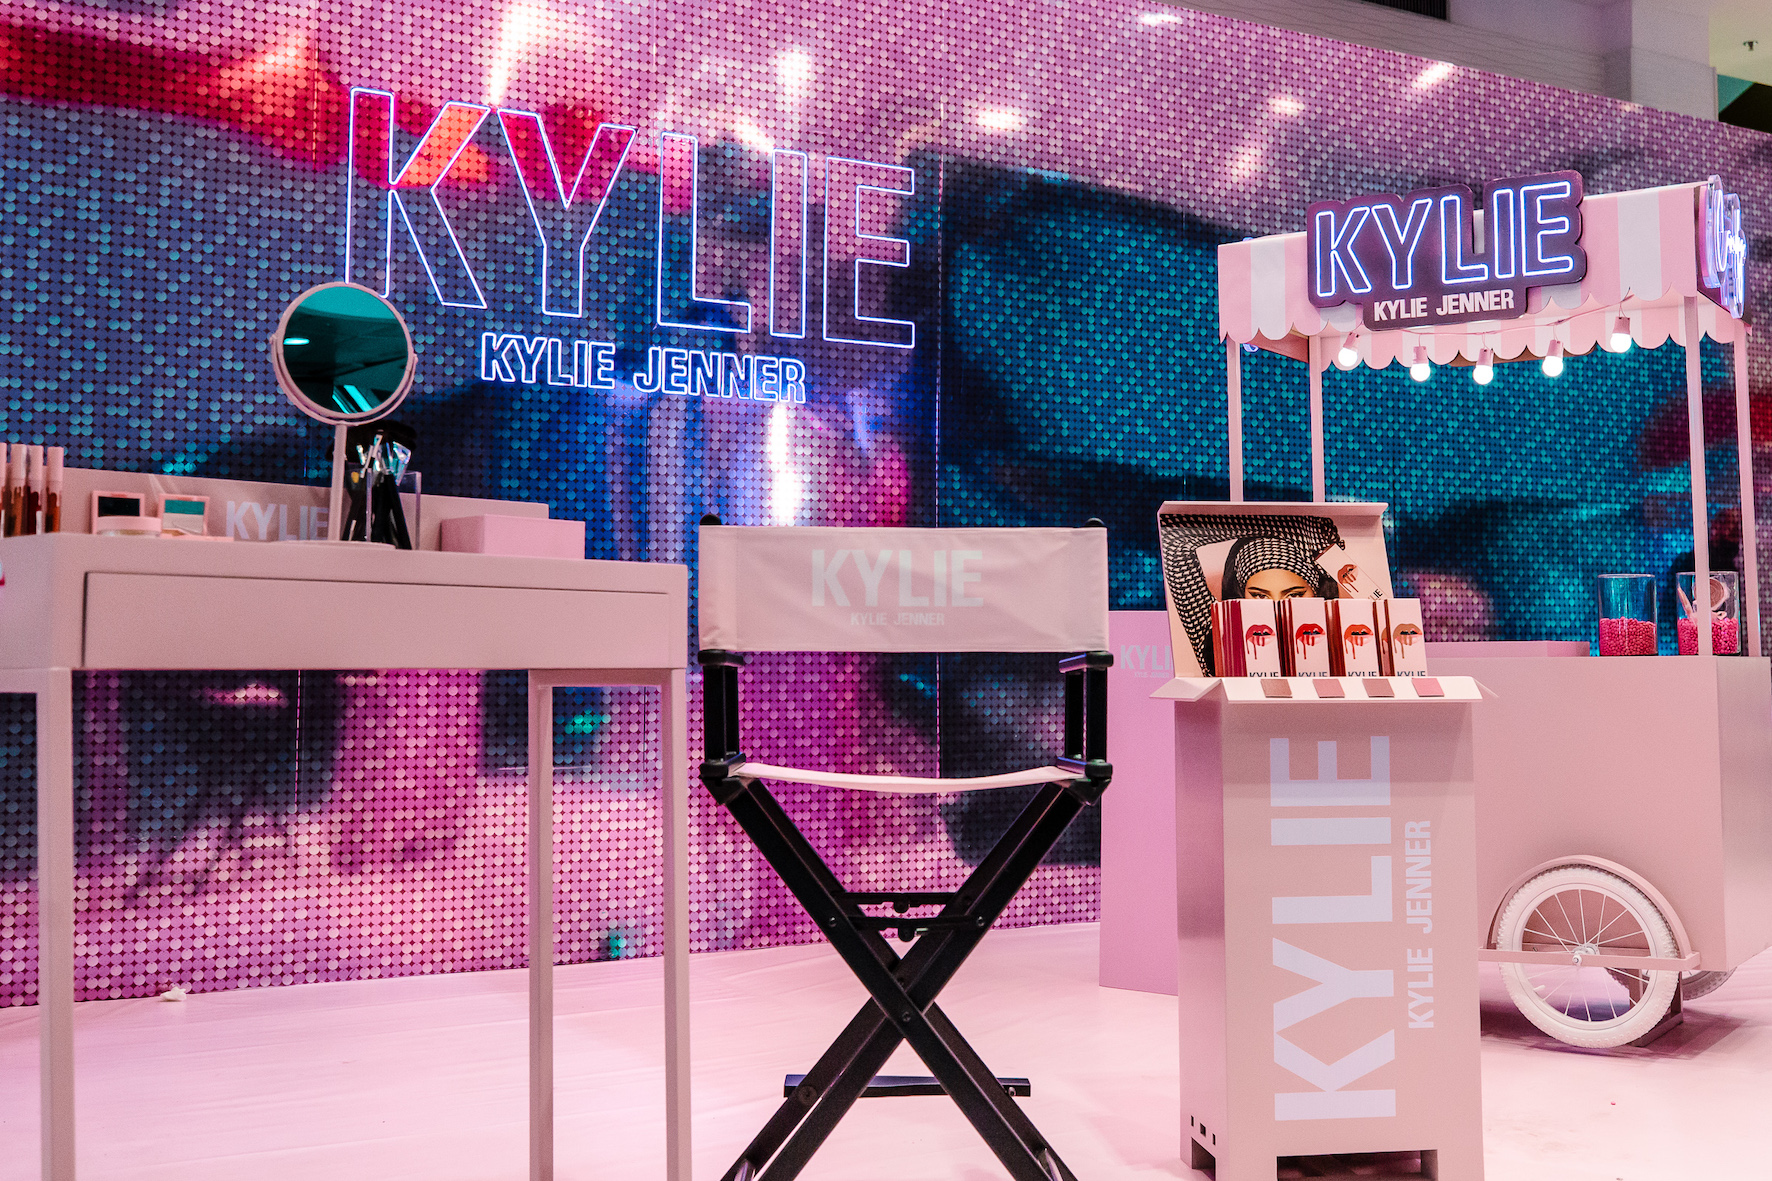 Coty launches Kylie Cosmetics in the Americas with Dufry and DFA